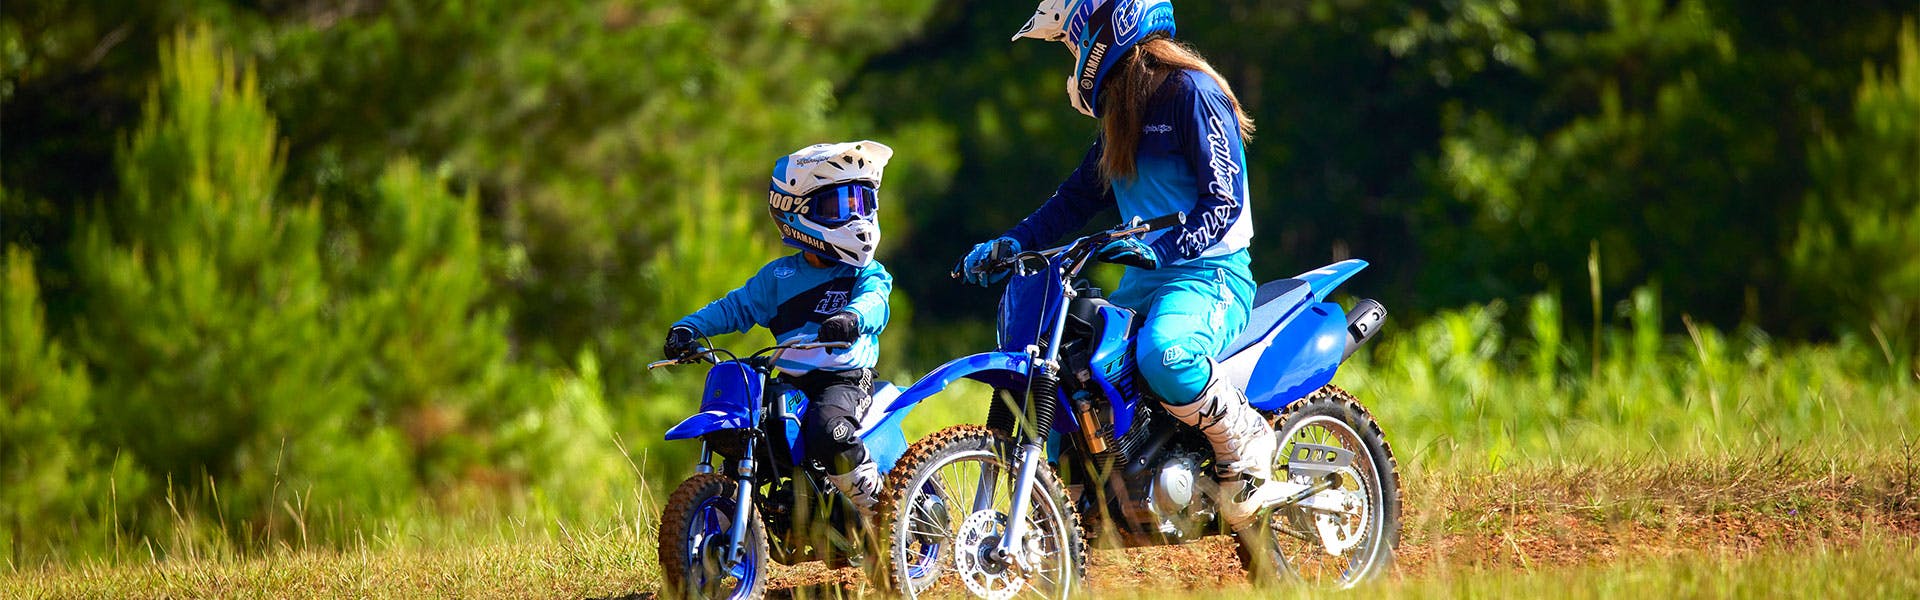 Yamaha PW50 in team yamaha blue colour, being ridden off-track